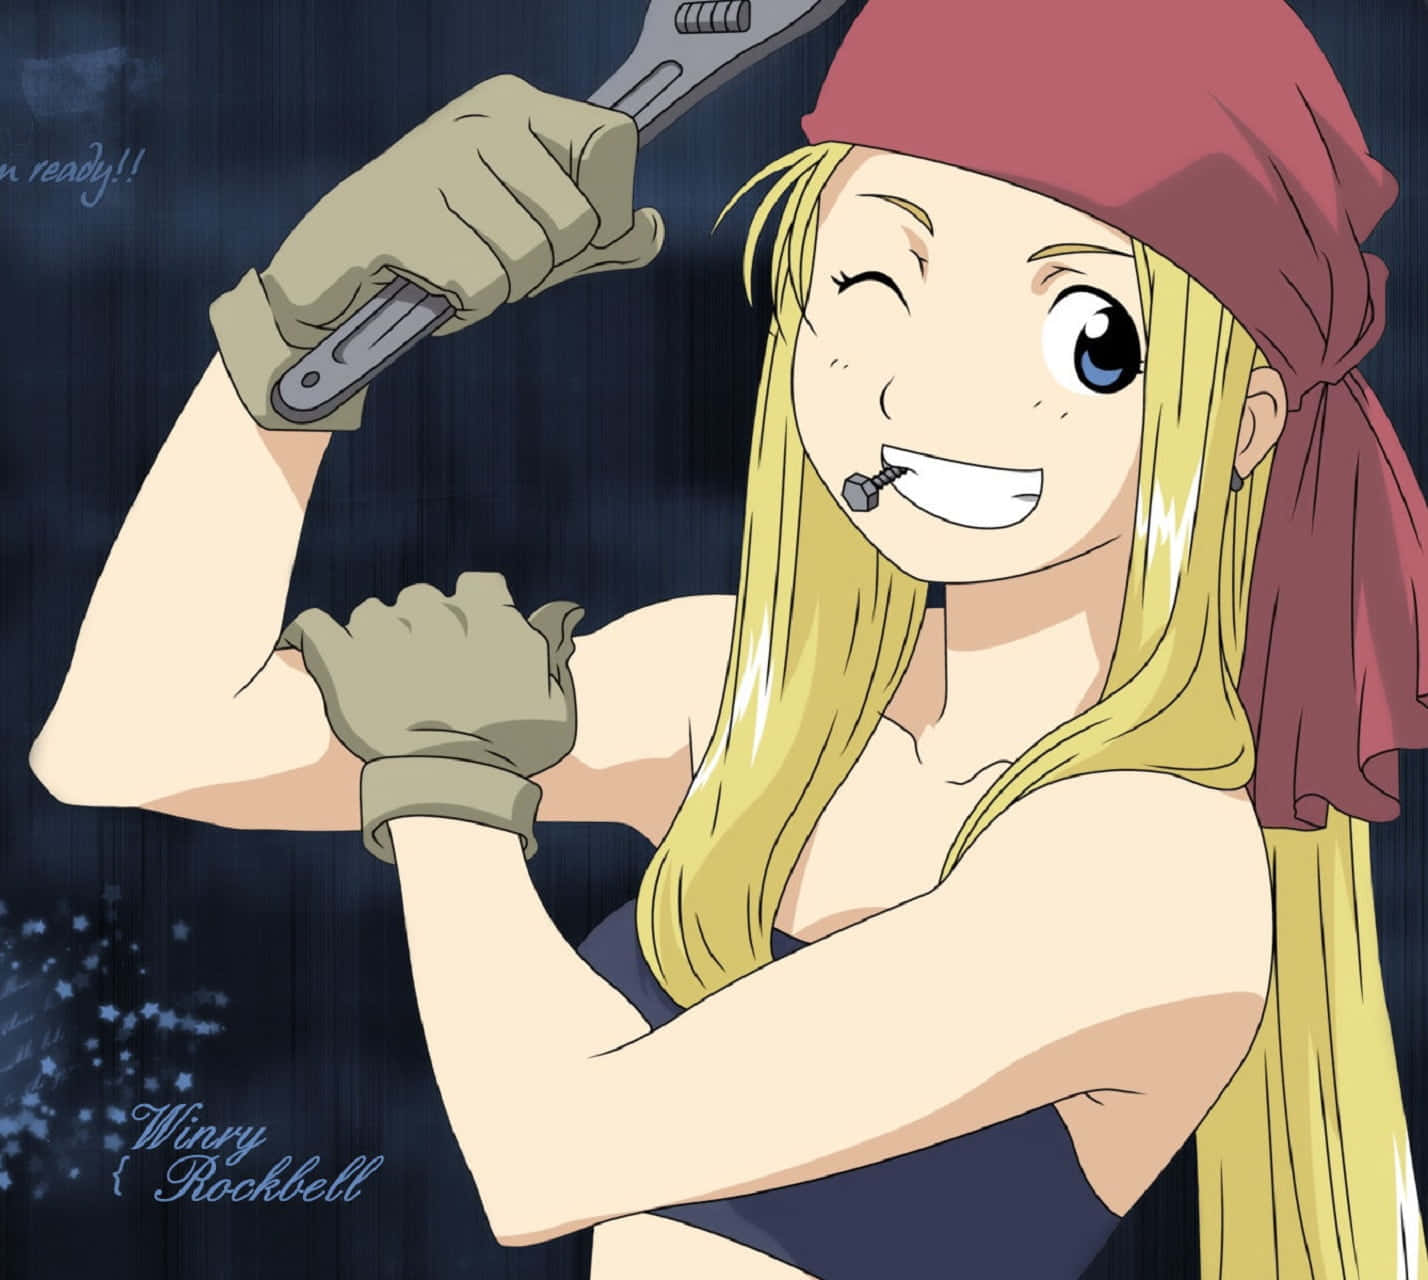 Cheerful Winry Rockbell on a vibrant background Wallpaper